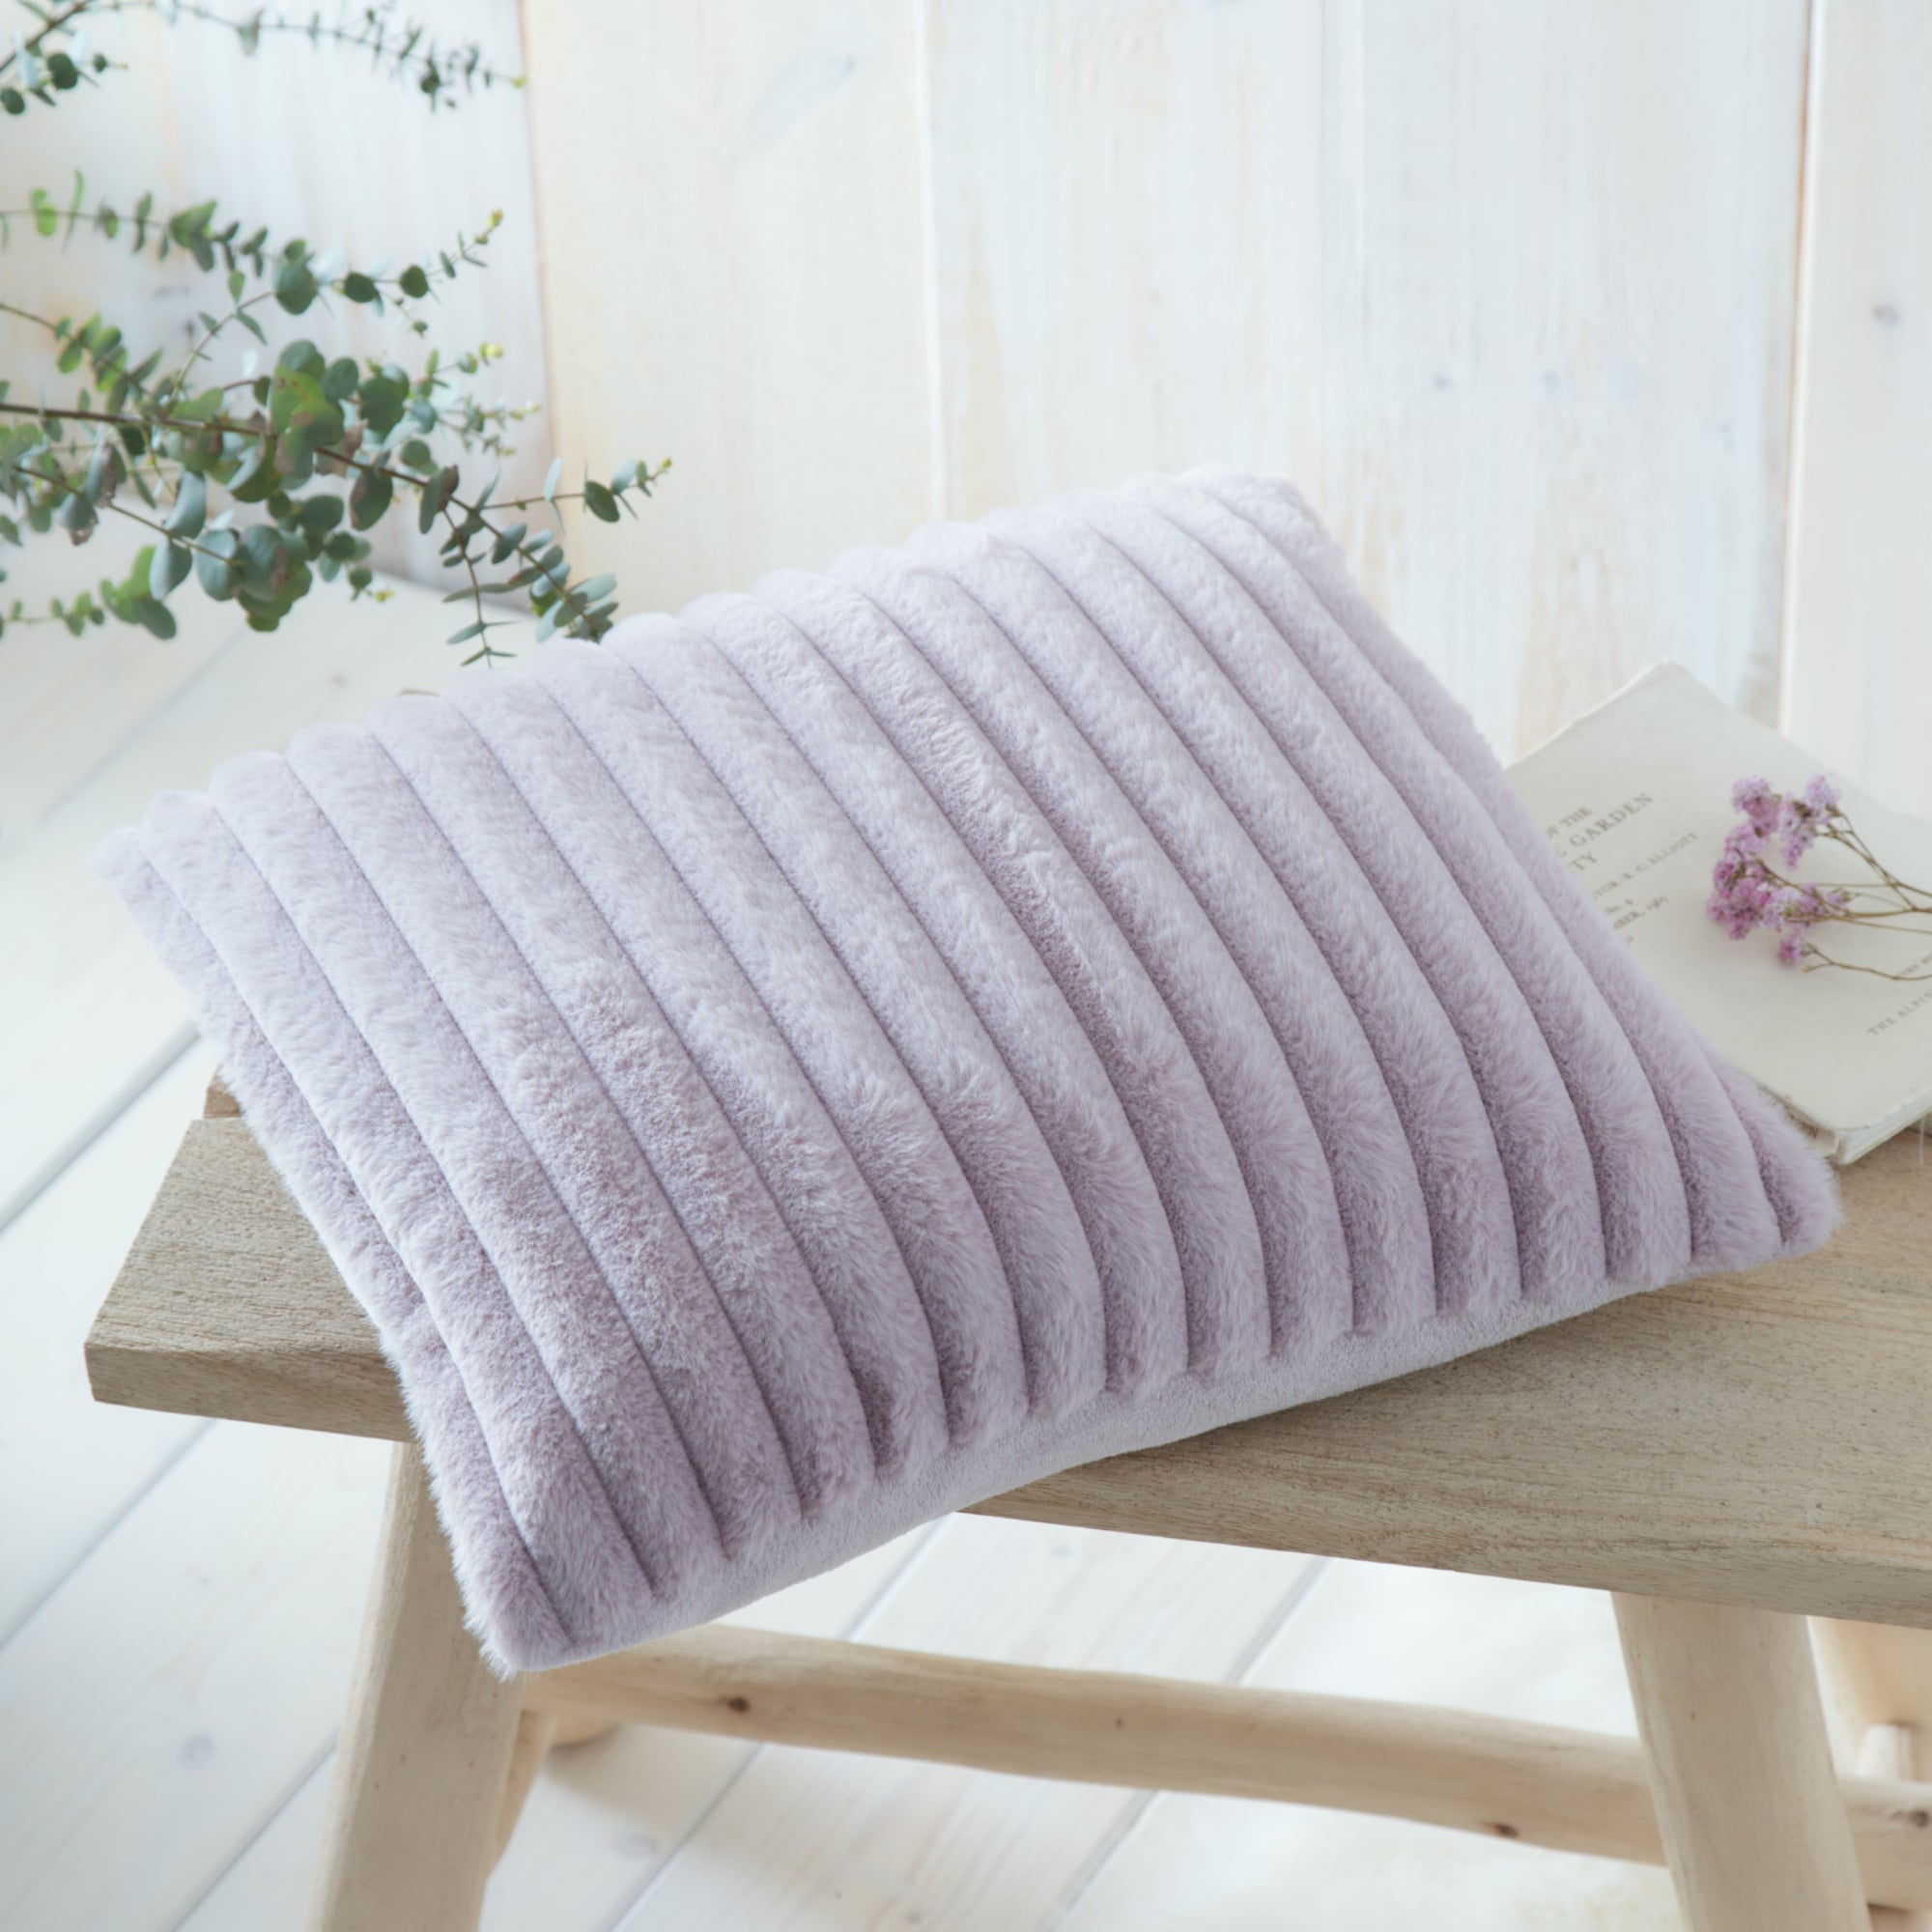 Filled Cushion Morritz by Appletree Hygge in Mauve